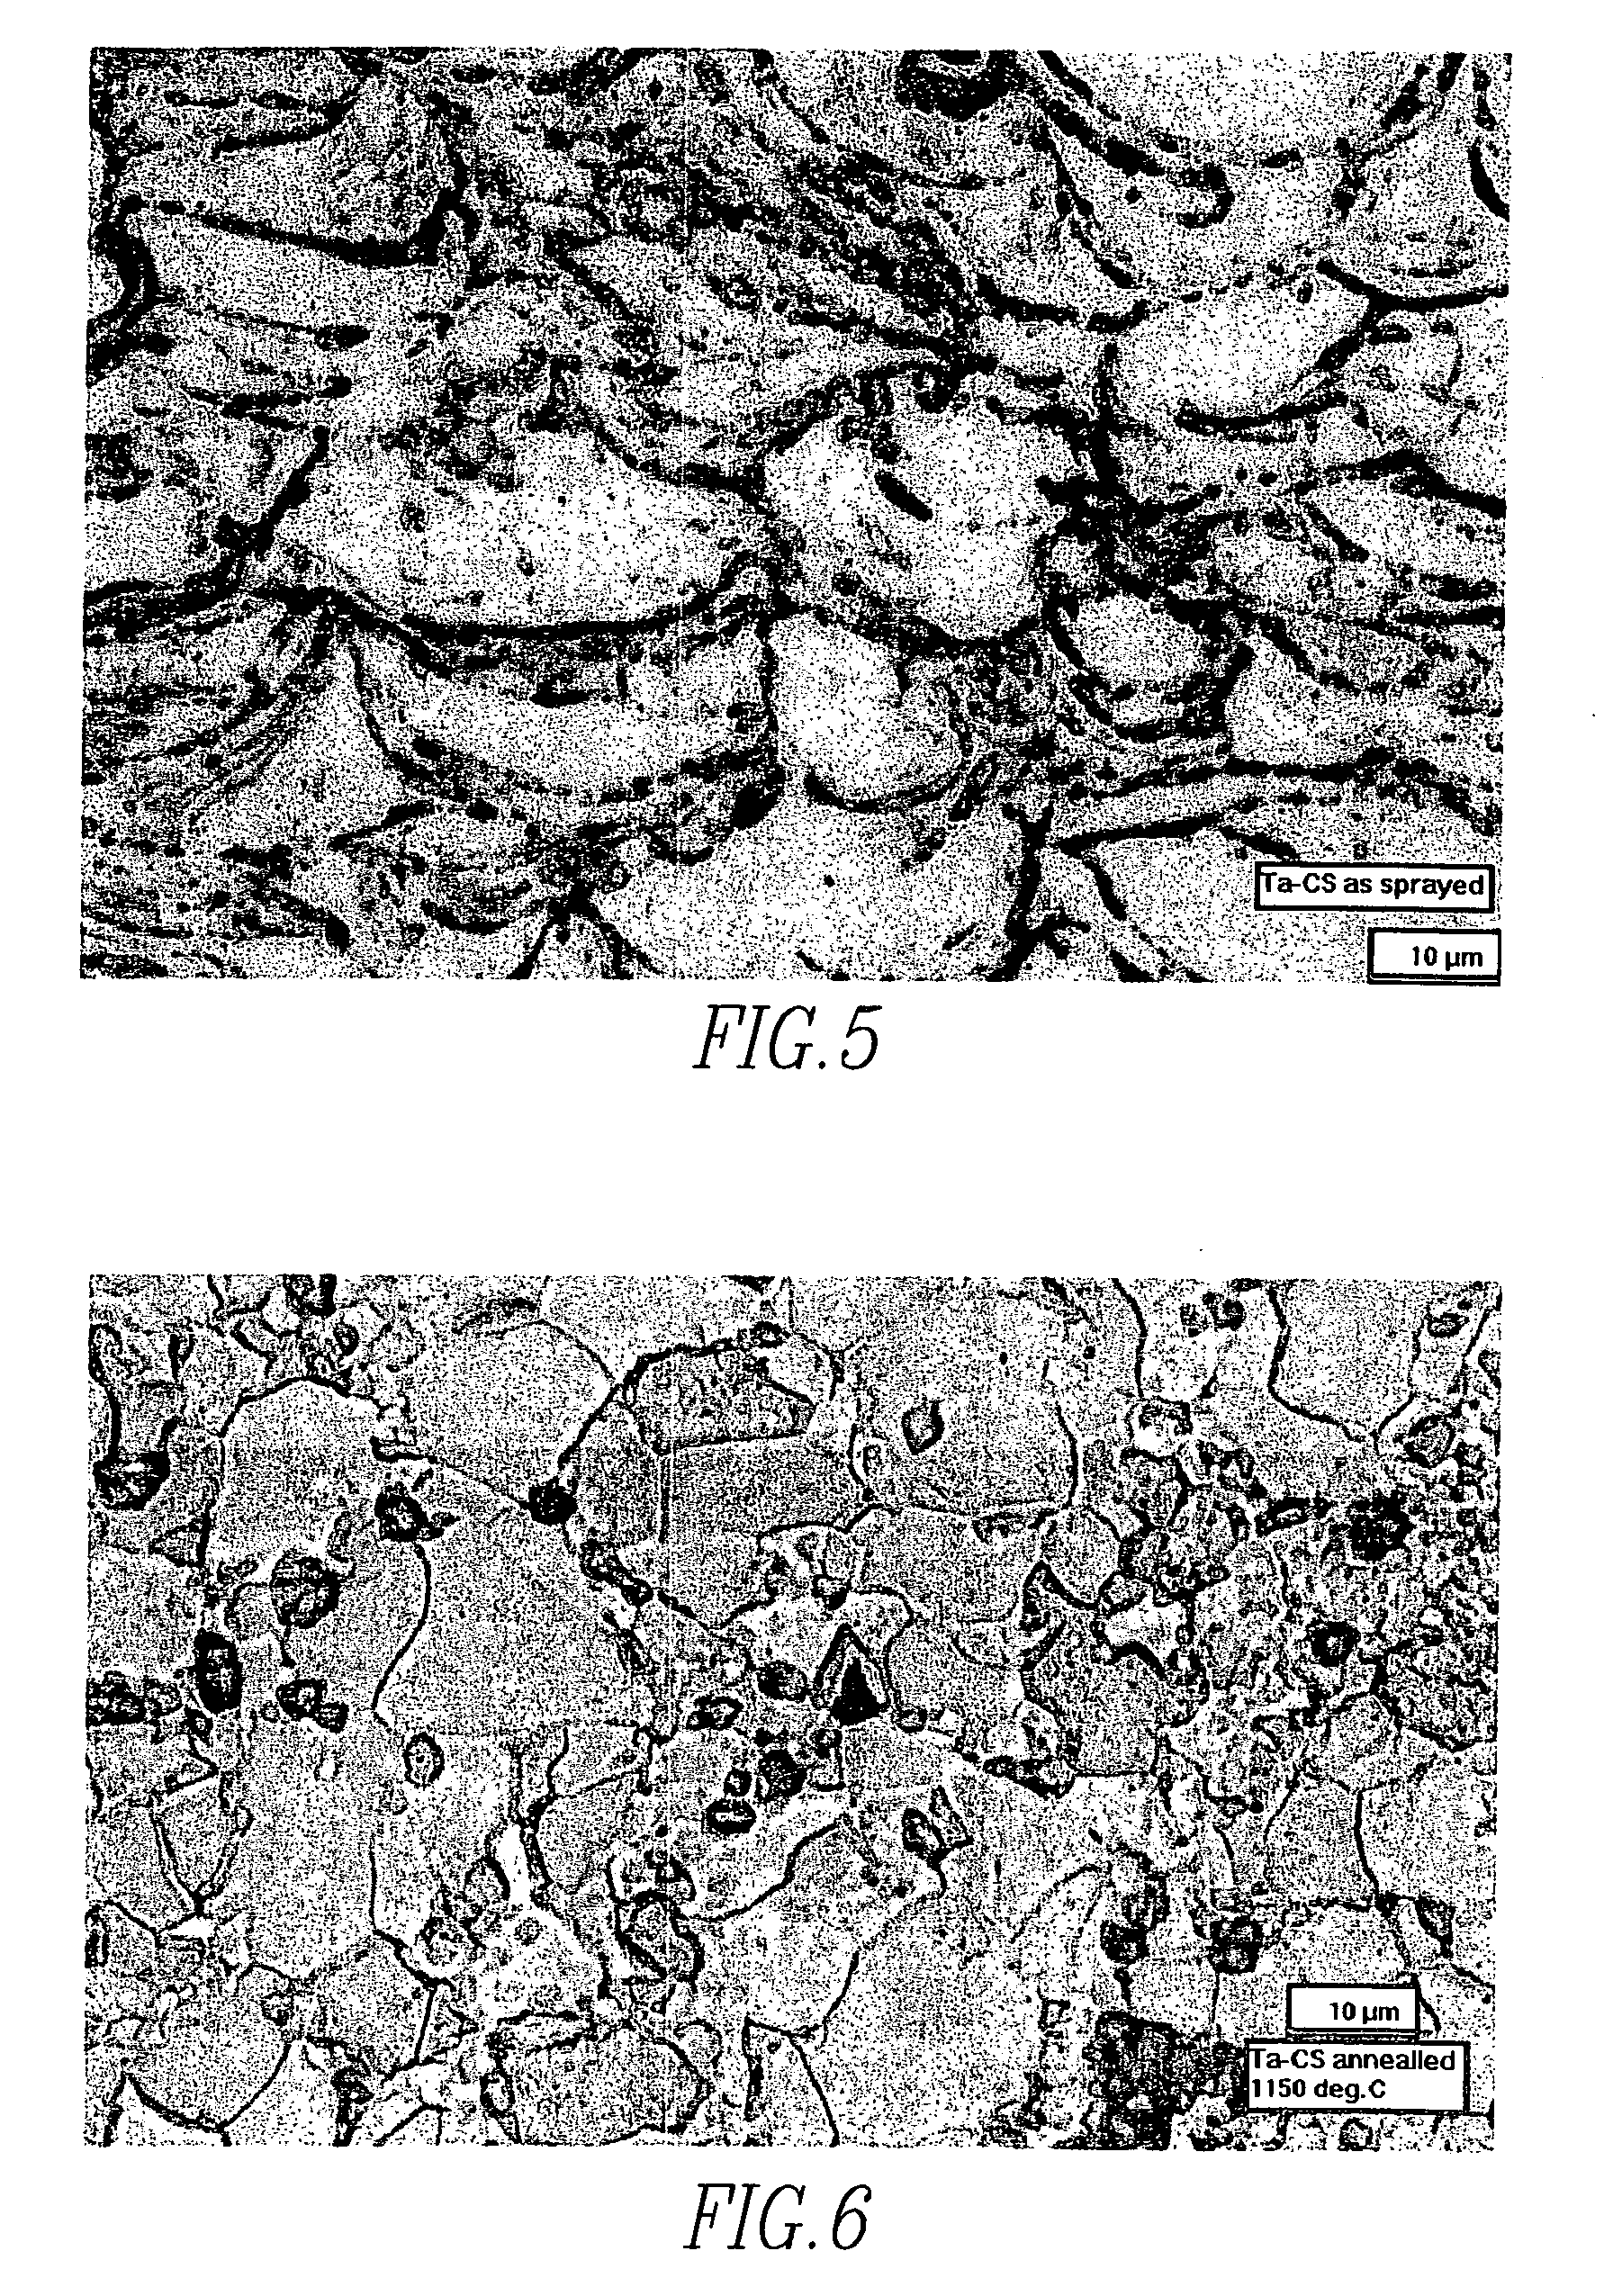 Method of joining tantalum clade steel structures